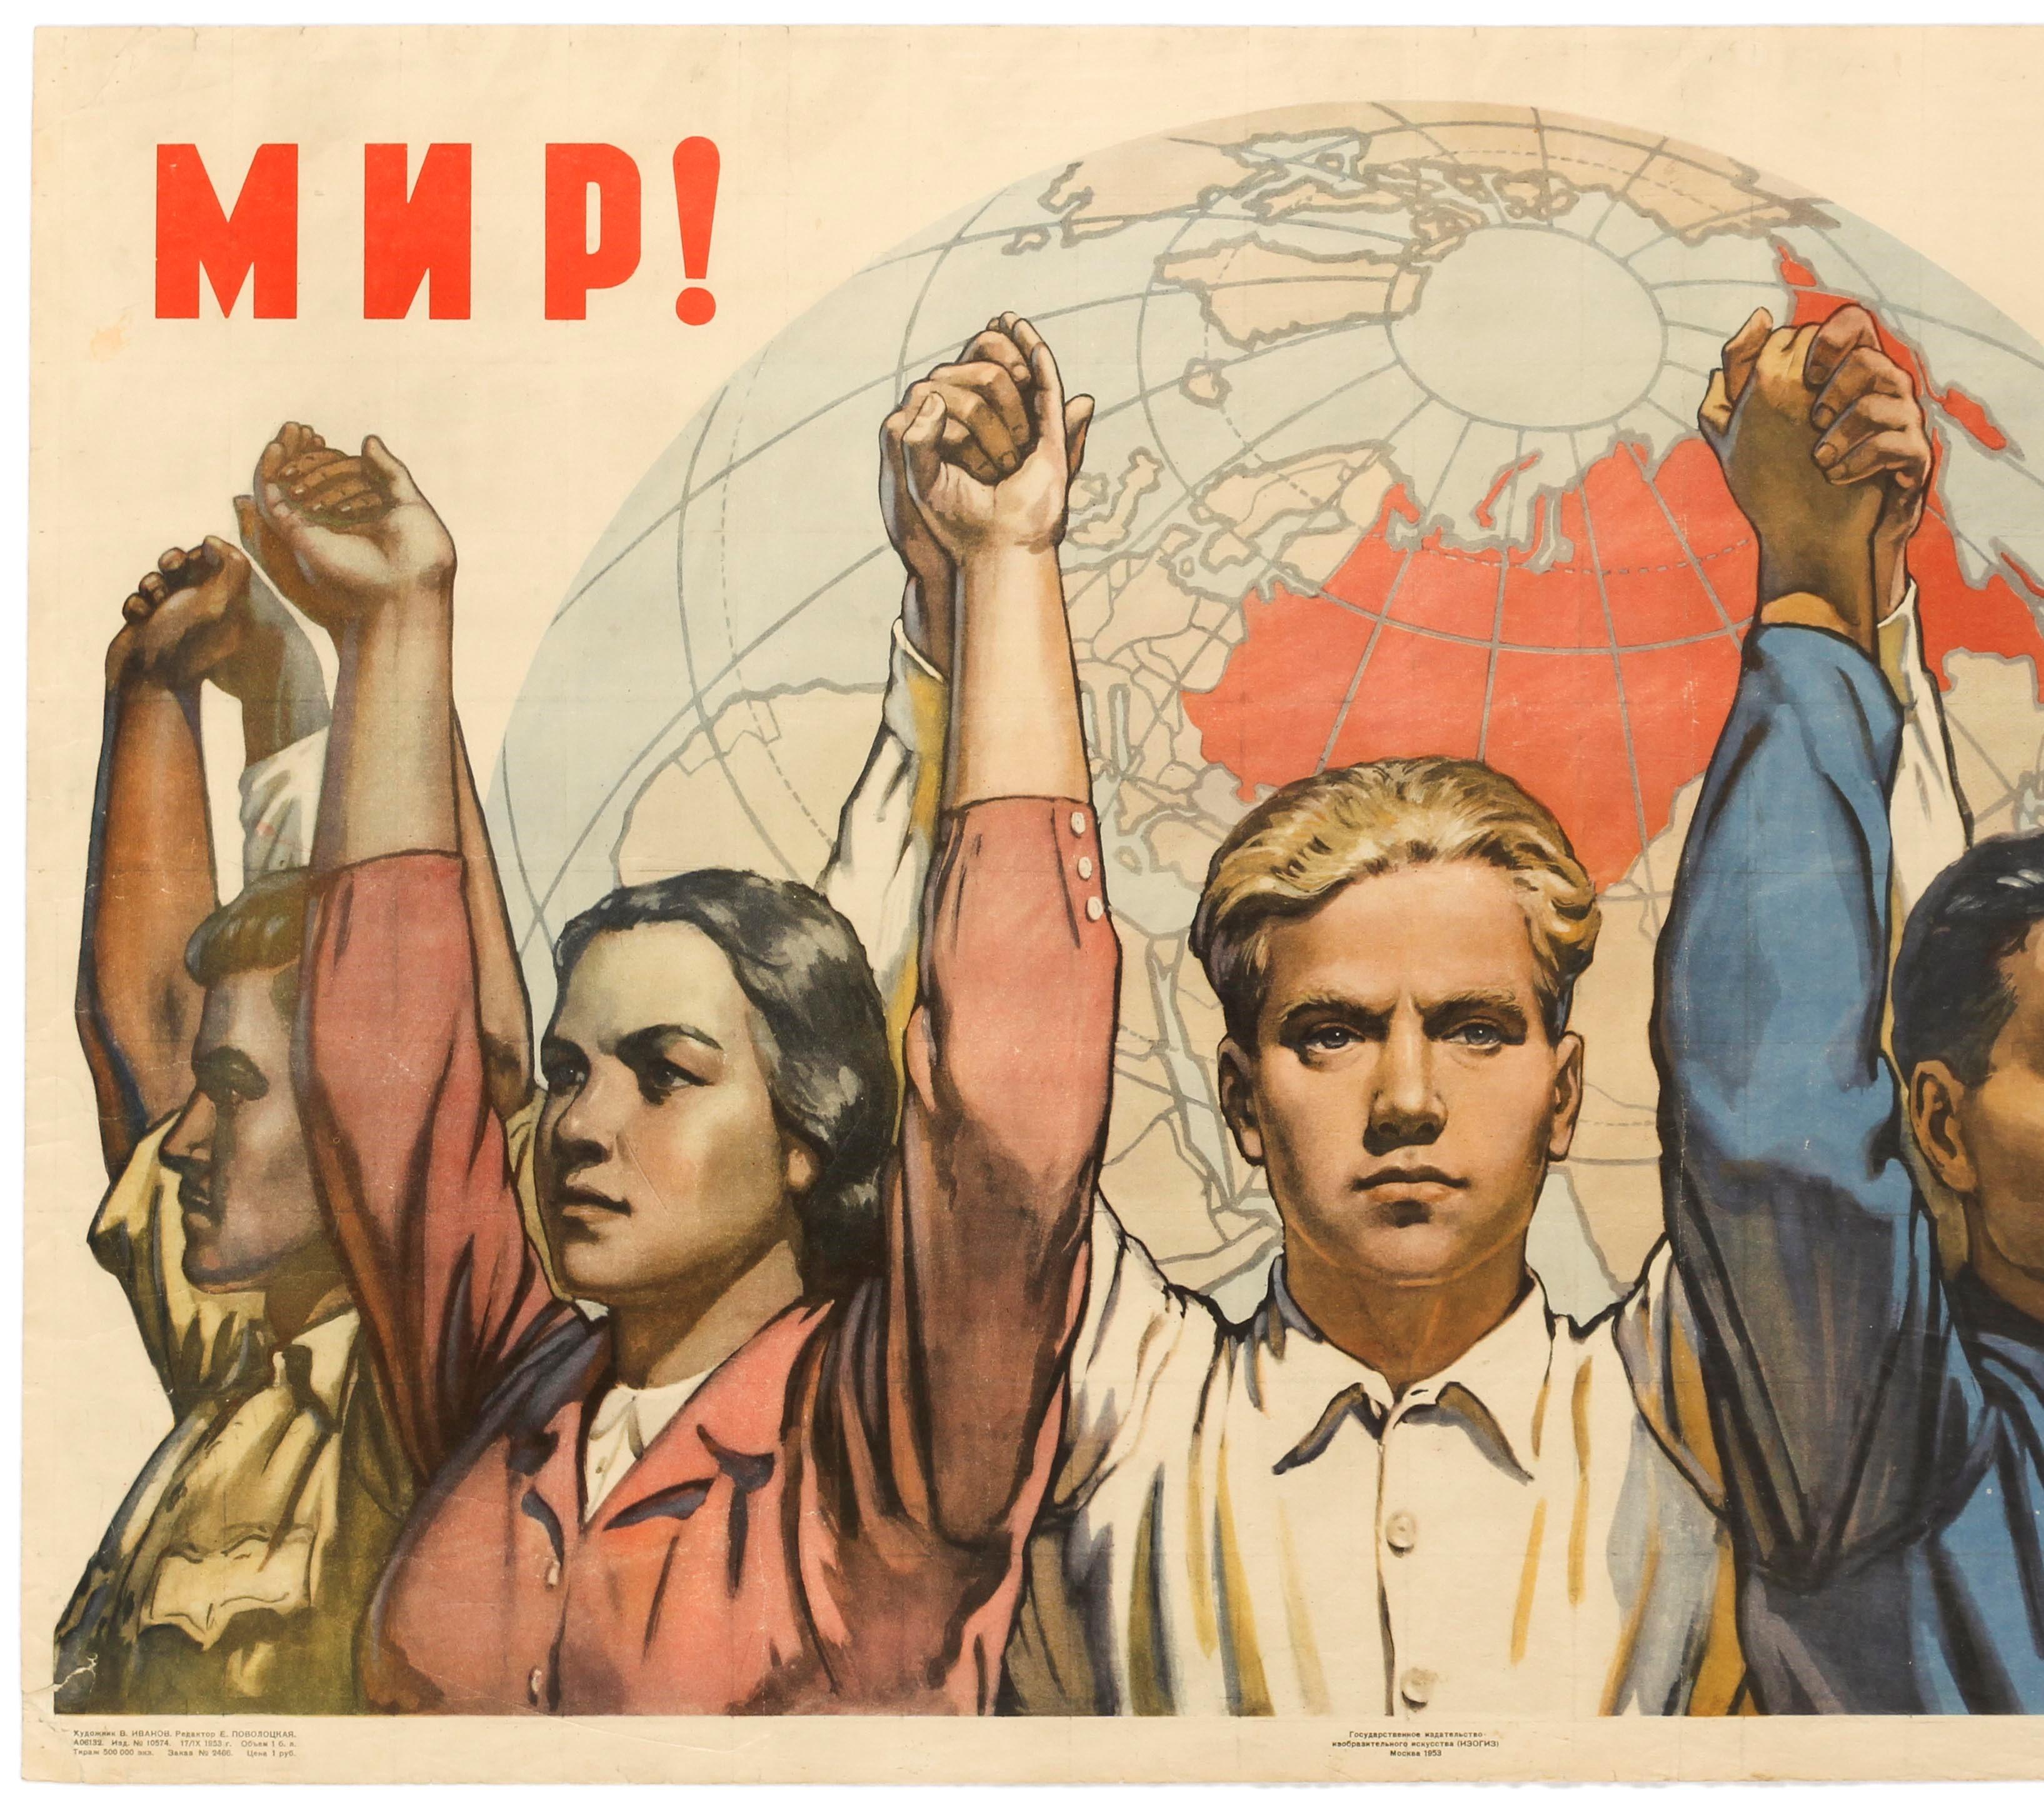 Original vintage Soviet propaganda poster promoting Peace and International Friendship featuring a great design depicting determined young people from around the world wearing their traditional dress from various countries, holding their hands up